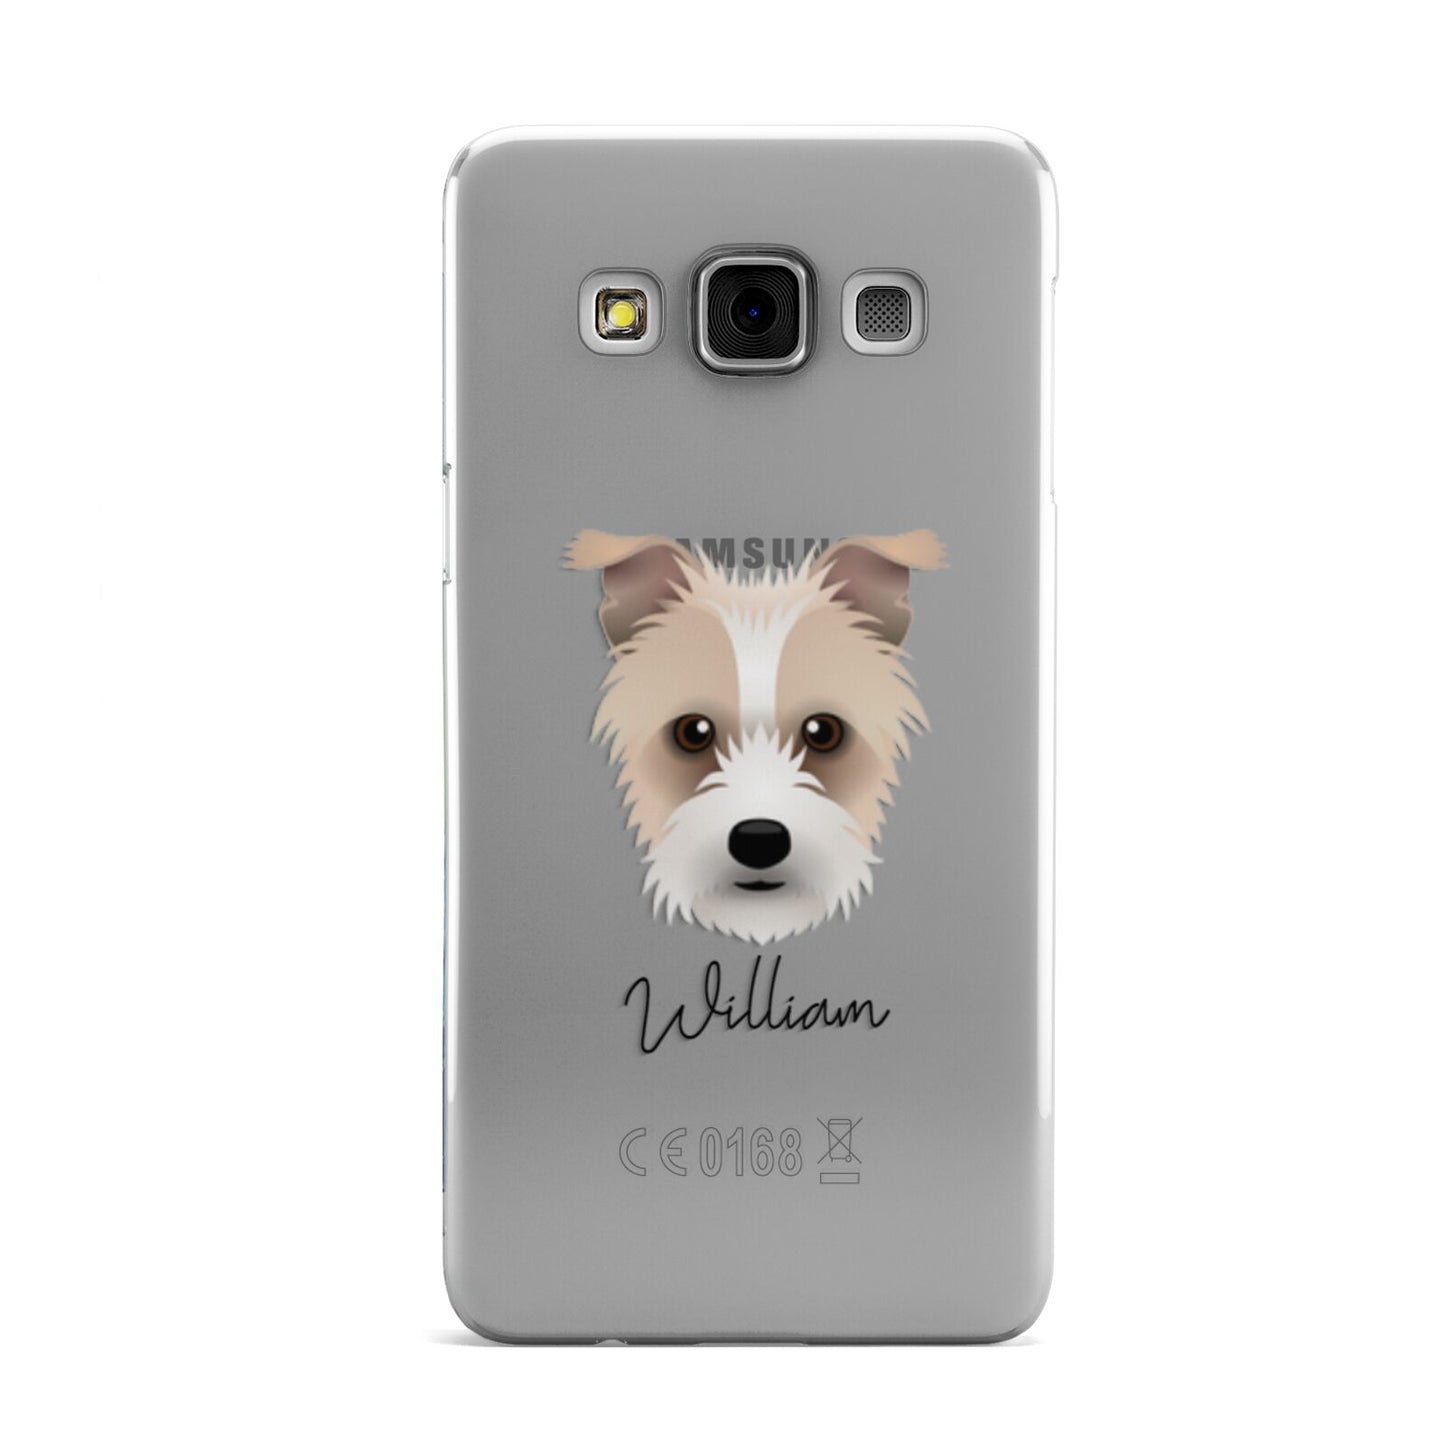 Sporting Lucas Terrier Personalised Samsung Galaxy A3 Case